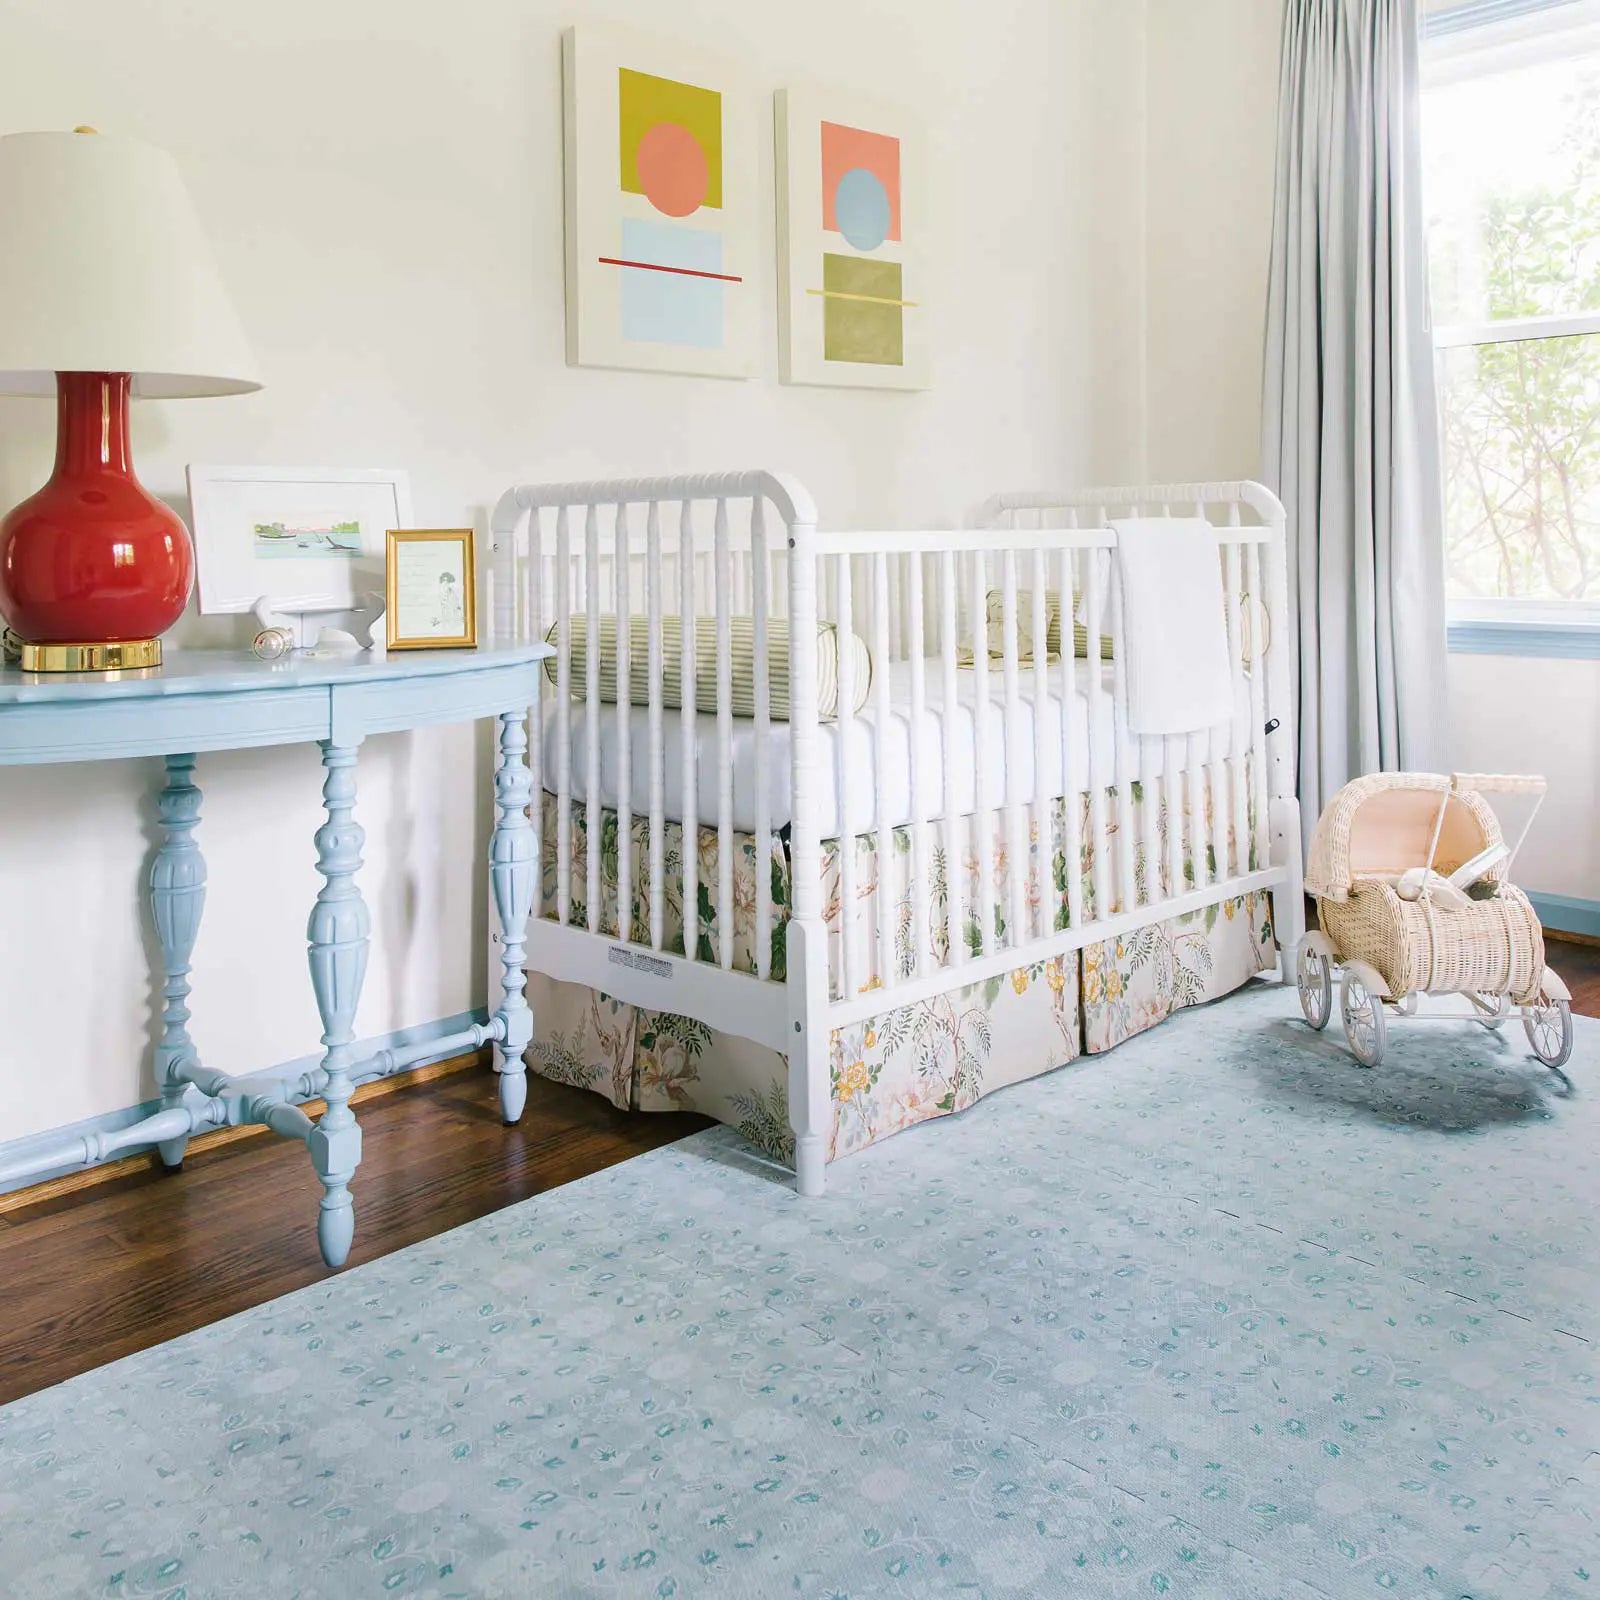 Powder blue floral pattern play mat shown in nursery with crib and toy buggy